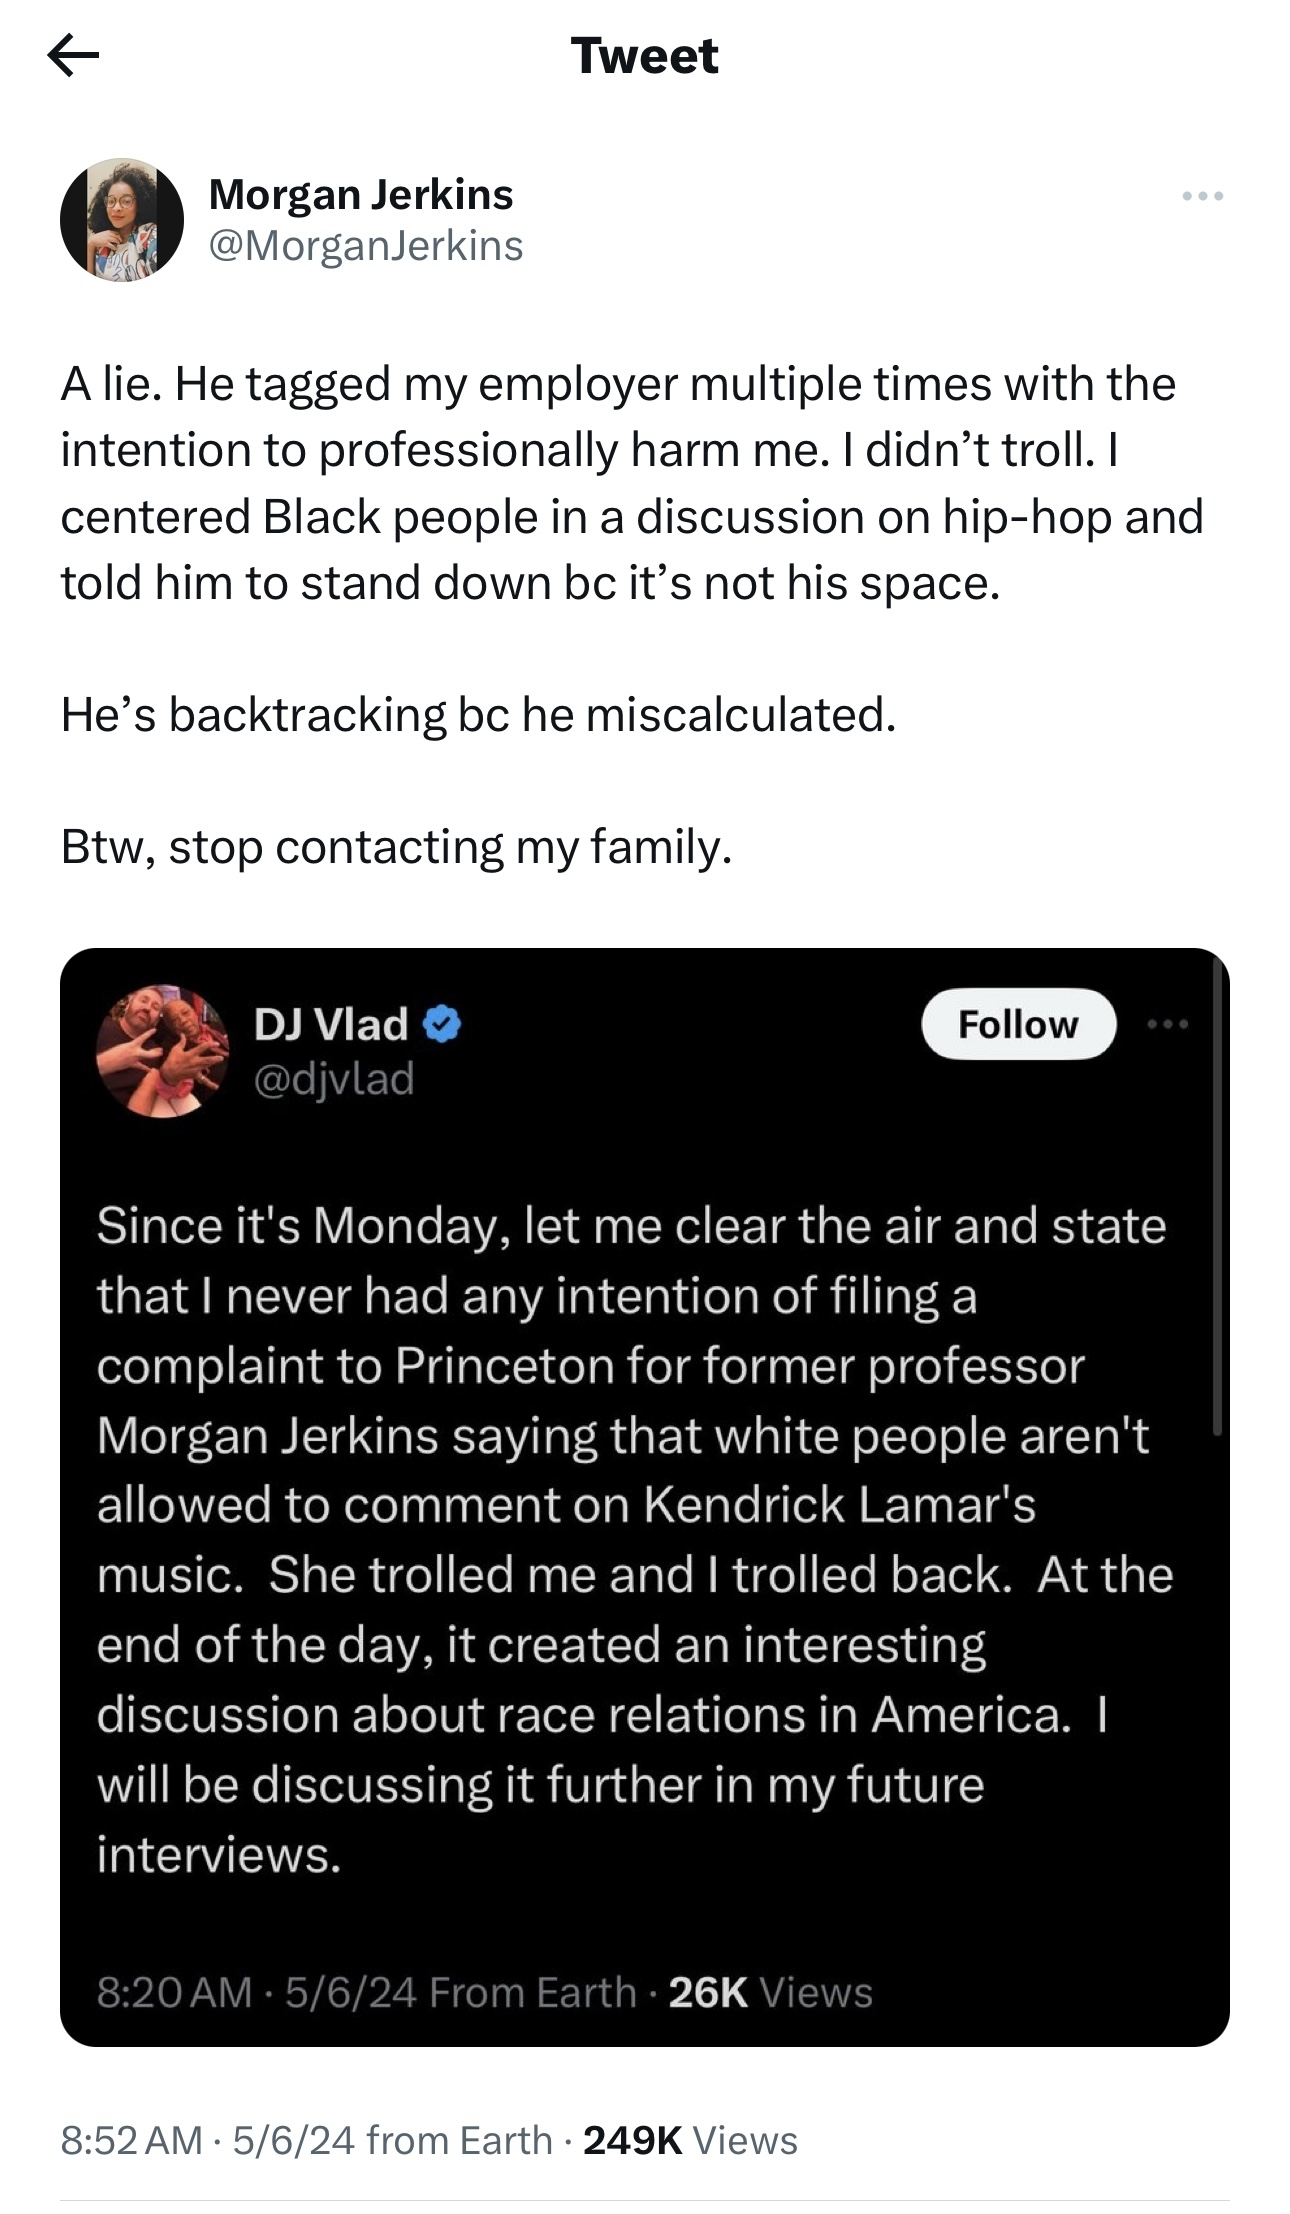 Two Twitter posts discussing a professional dispute, one defending against claims of harmful intentions, the other addressing race relations